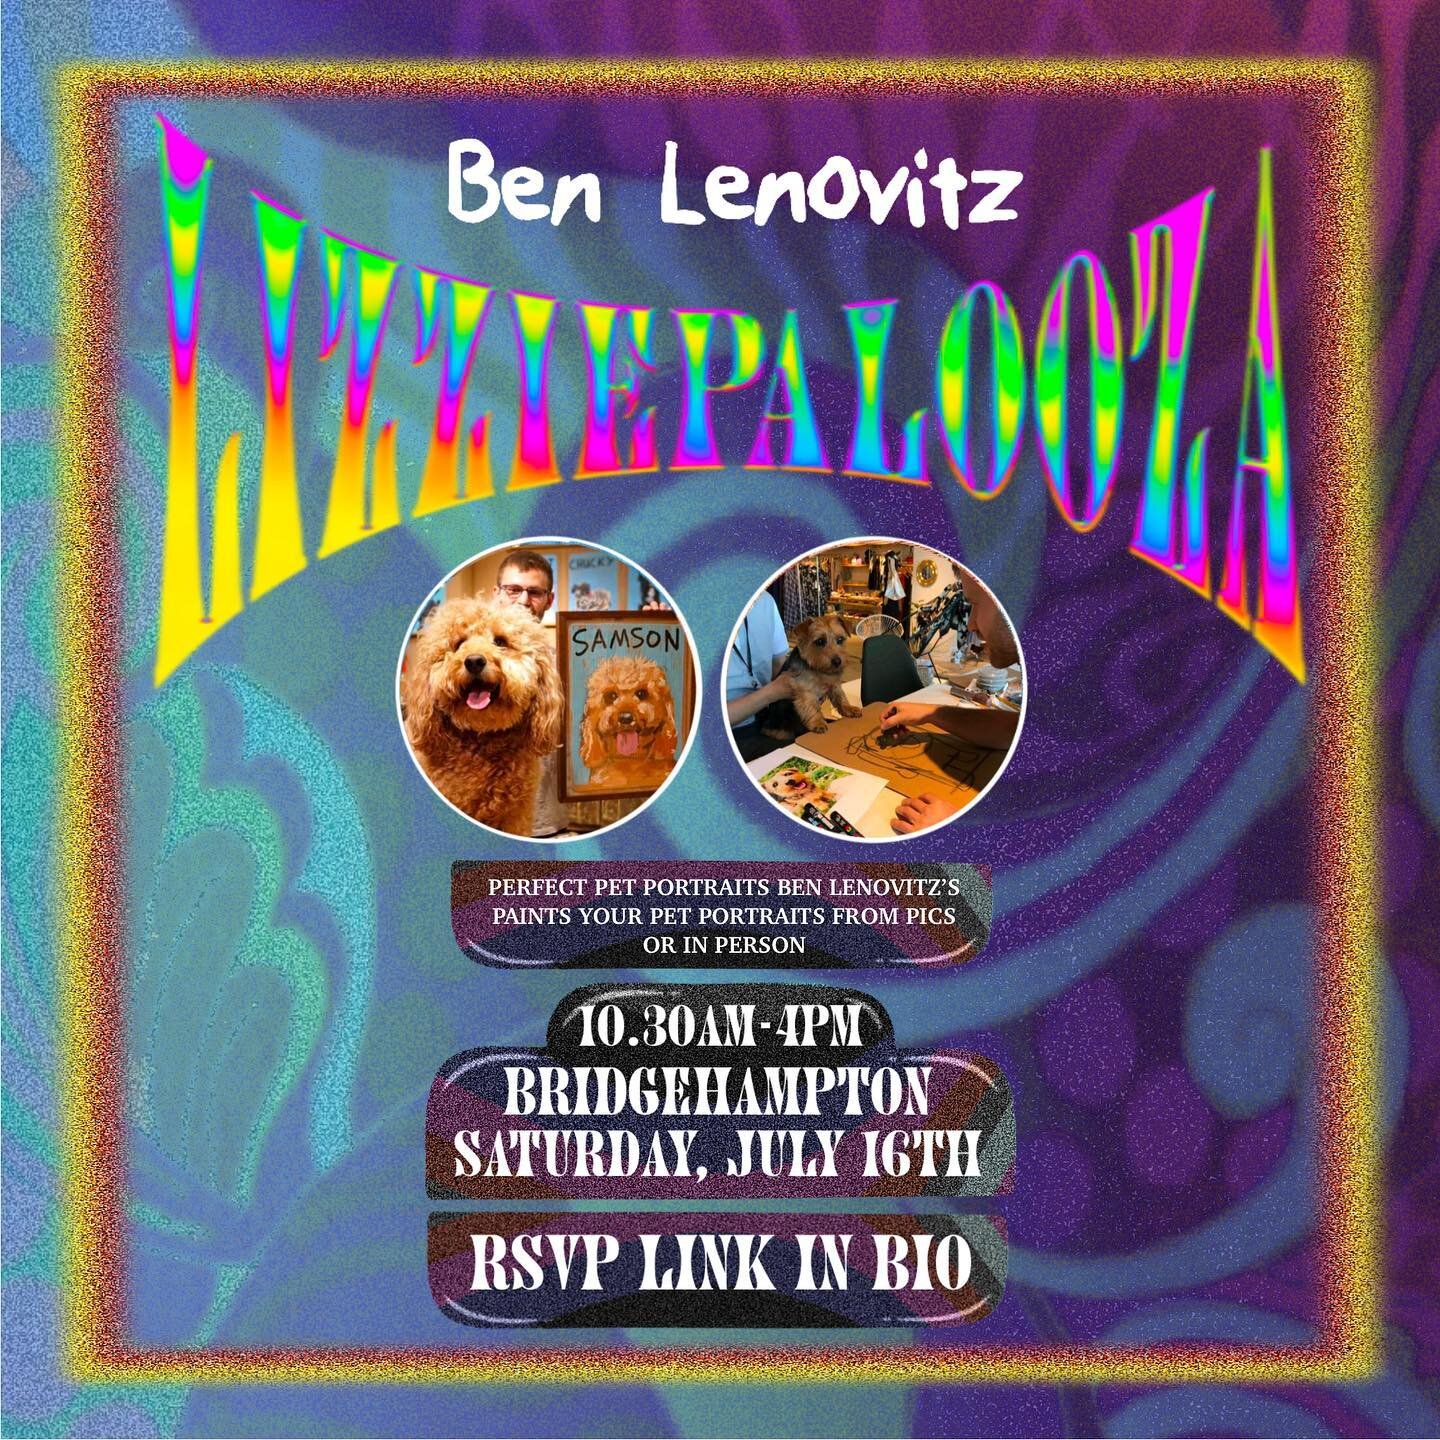 Don&rsquo;t Miss The Biggest Shopping Event Of The Summer
☀️🛍
LIZZIEPALOOZA brings Ben Lenovitz to the Hamptons &mdash; Ben will paint a custom portrait of your pet from pics on your phone &mdash; or bring your furry friend on site for a live portra